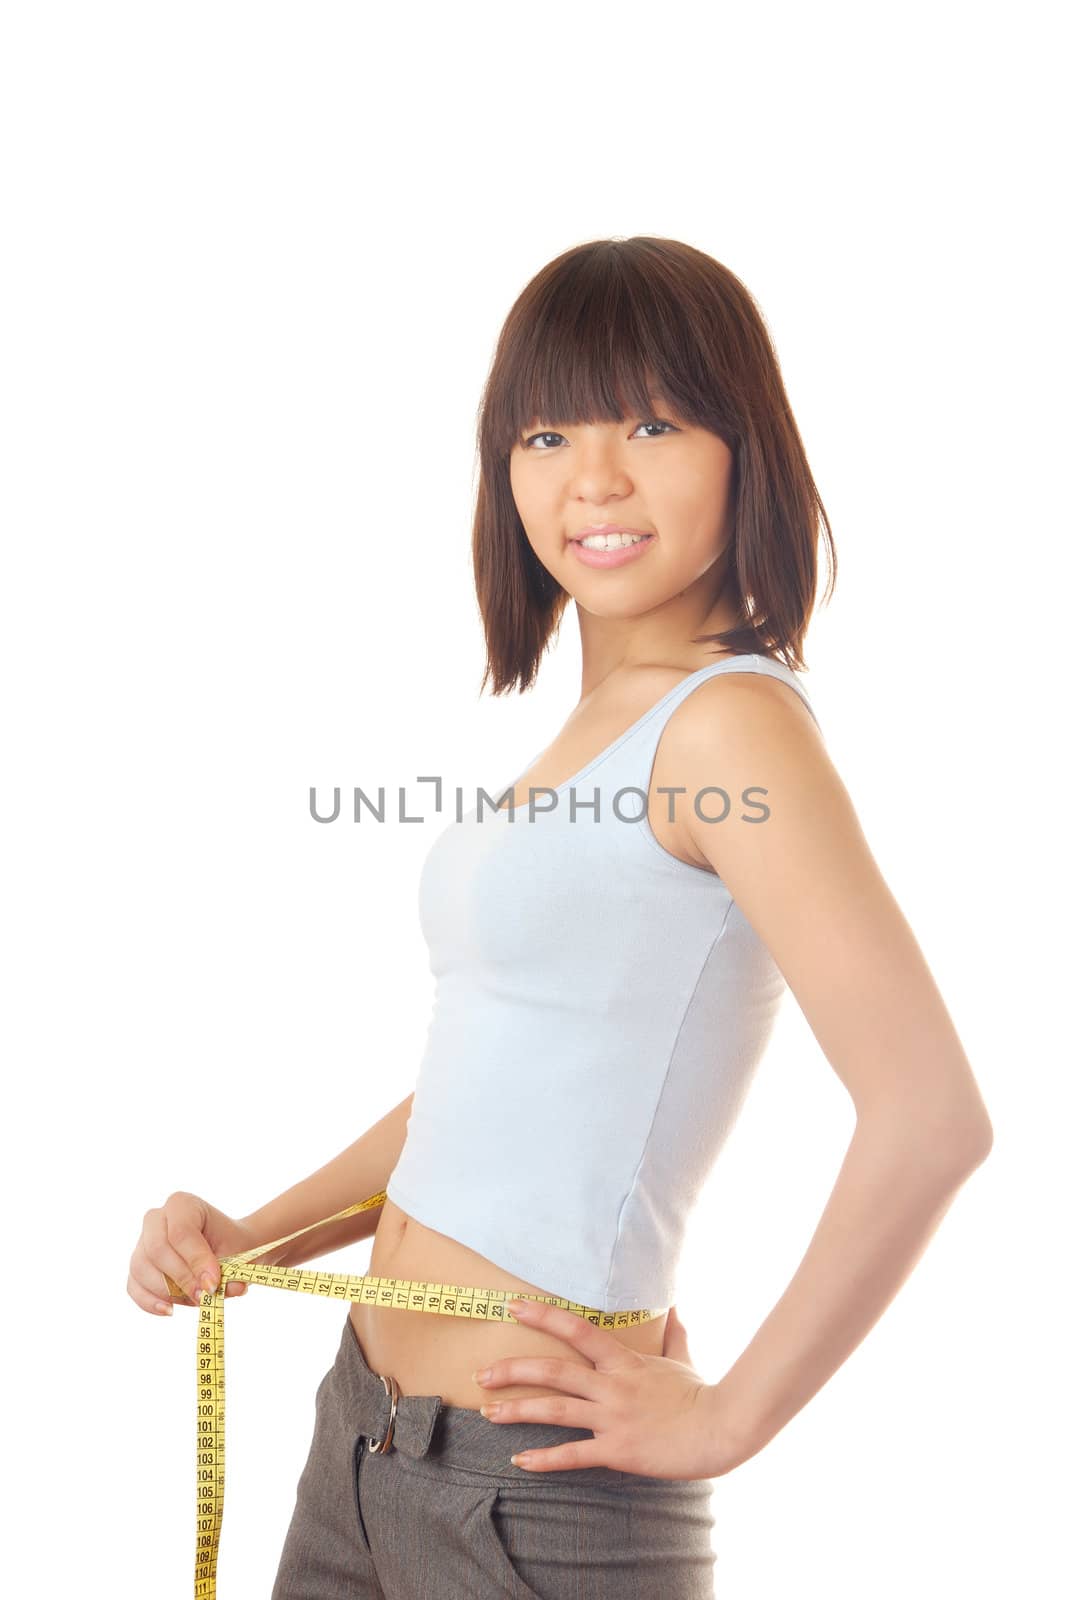 Photo of the smiling model with tape measure on her beltline